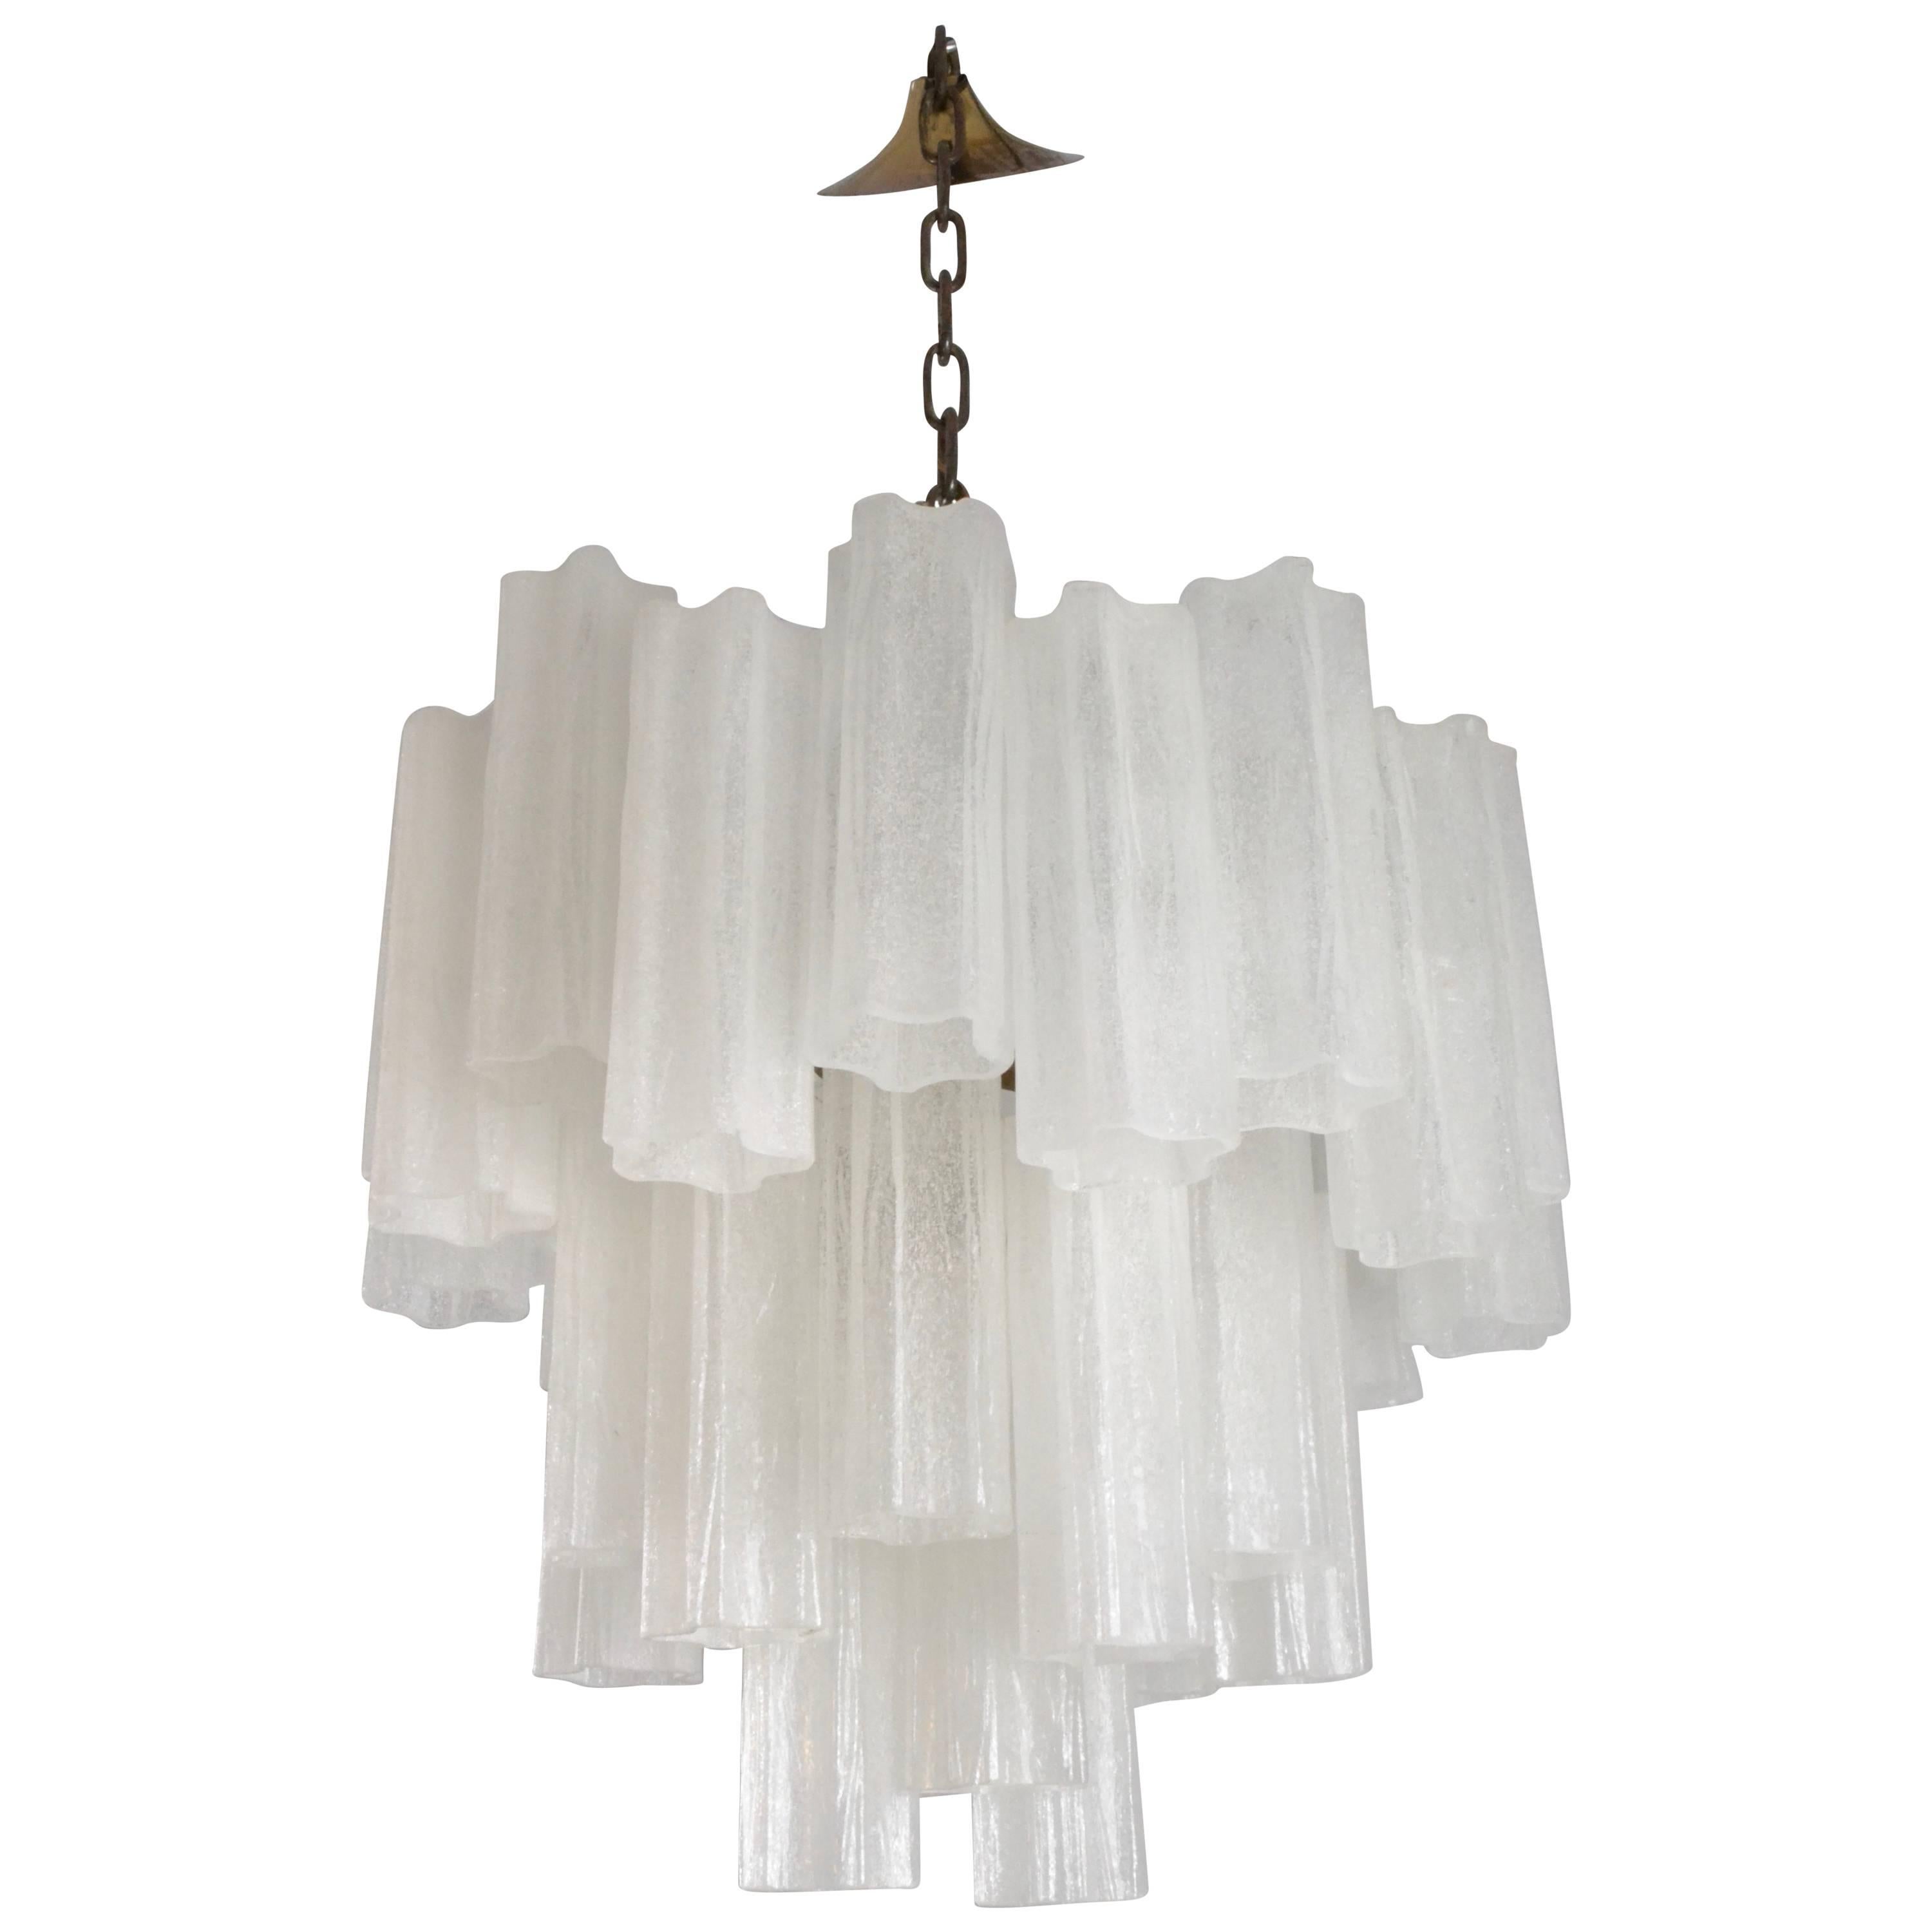 Rare Frosted Tronchi Tube Chandelier, Italy, circa 1970s